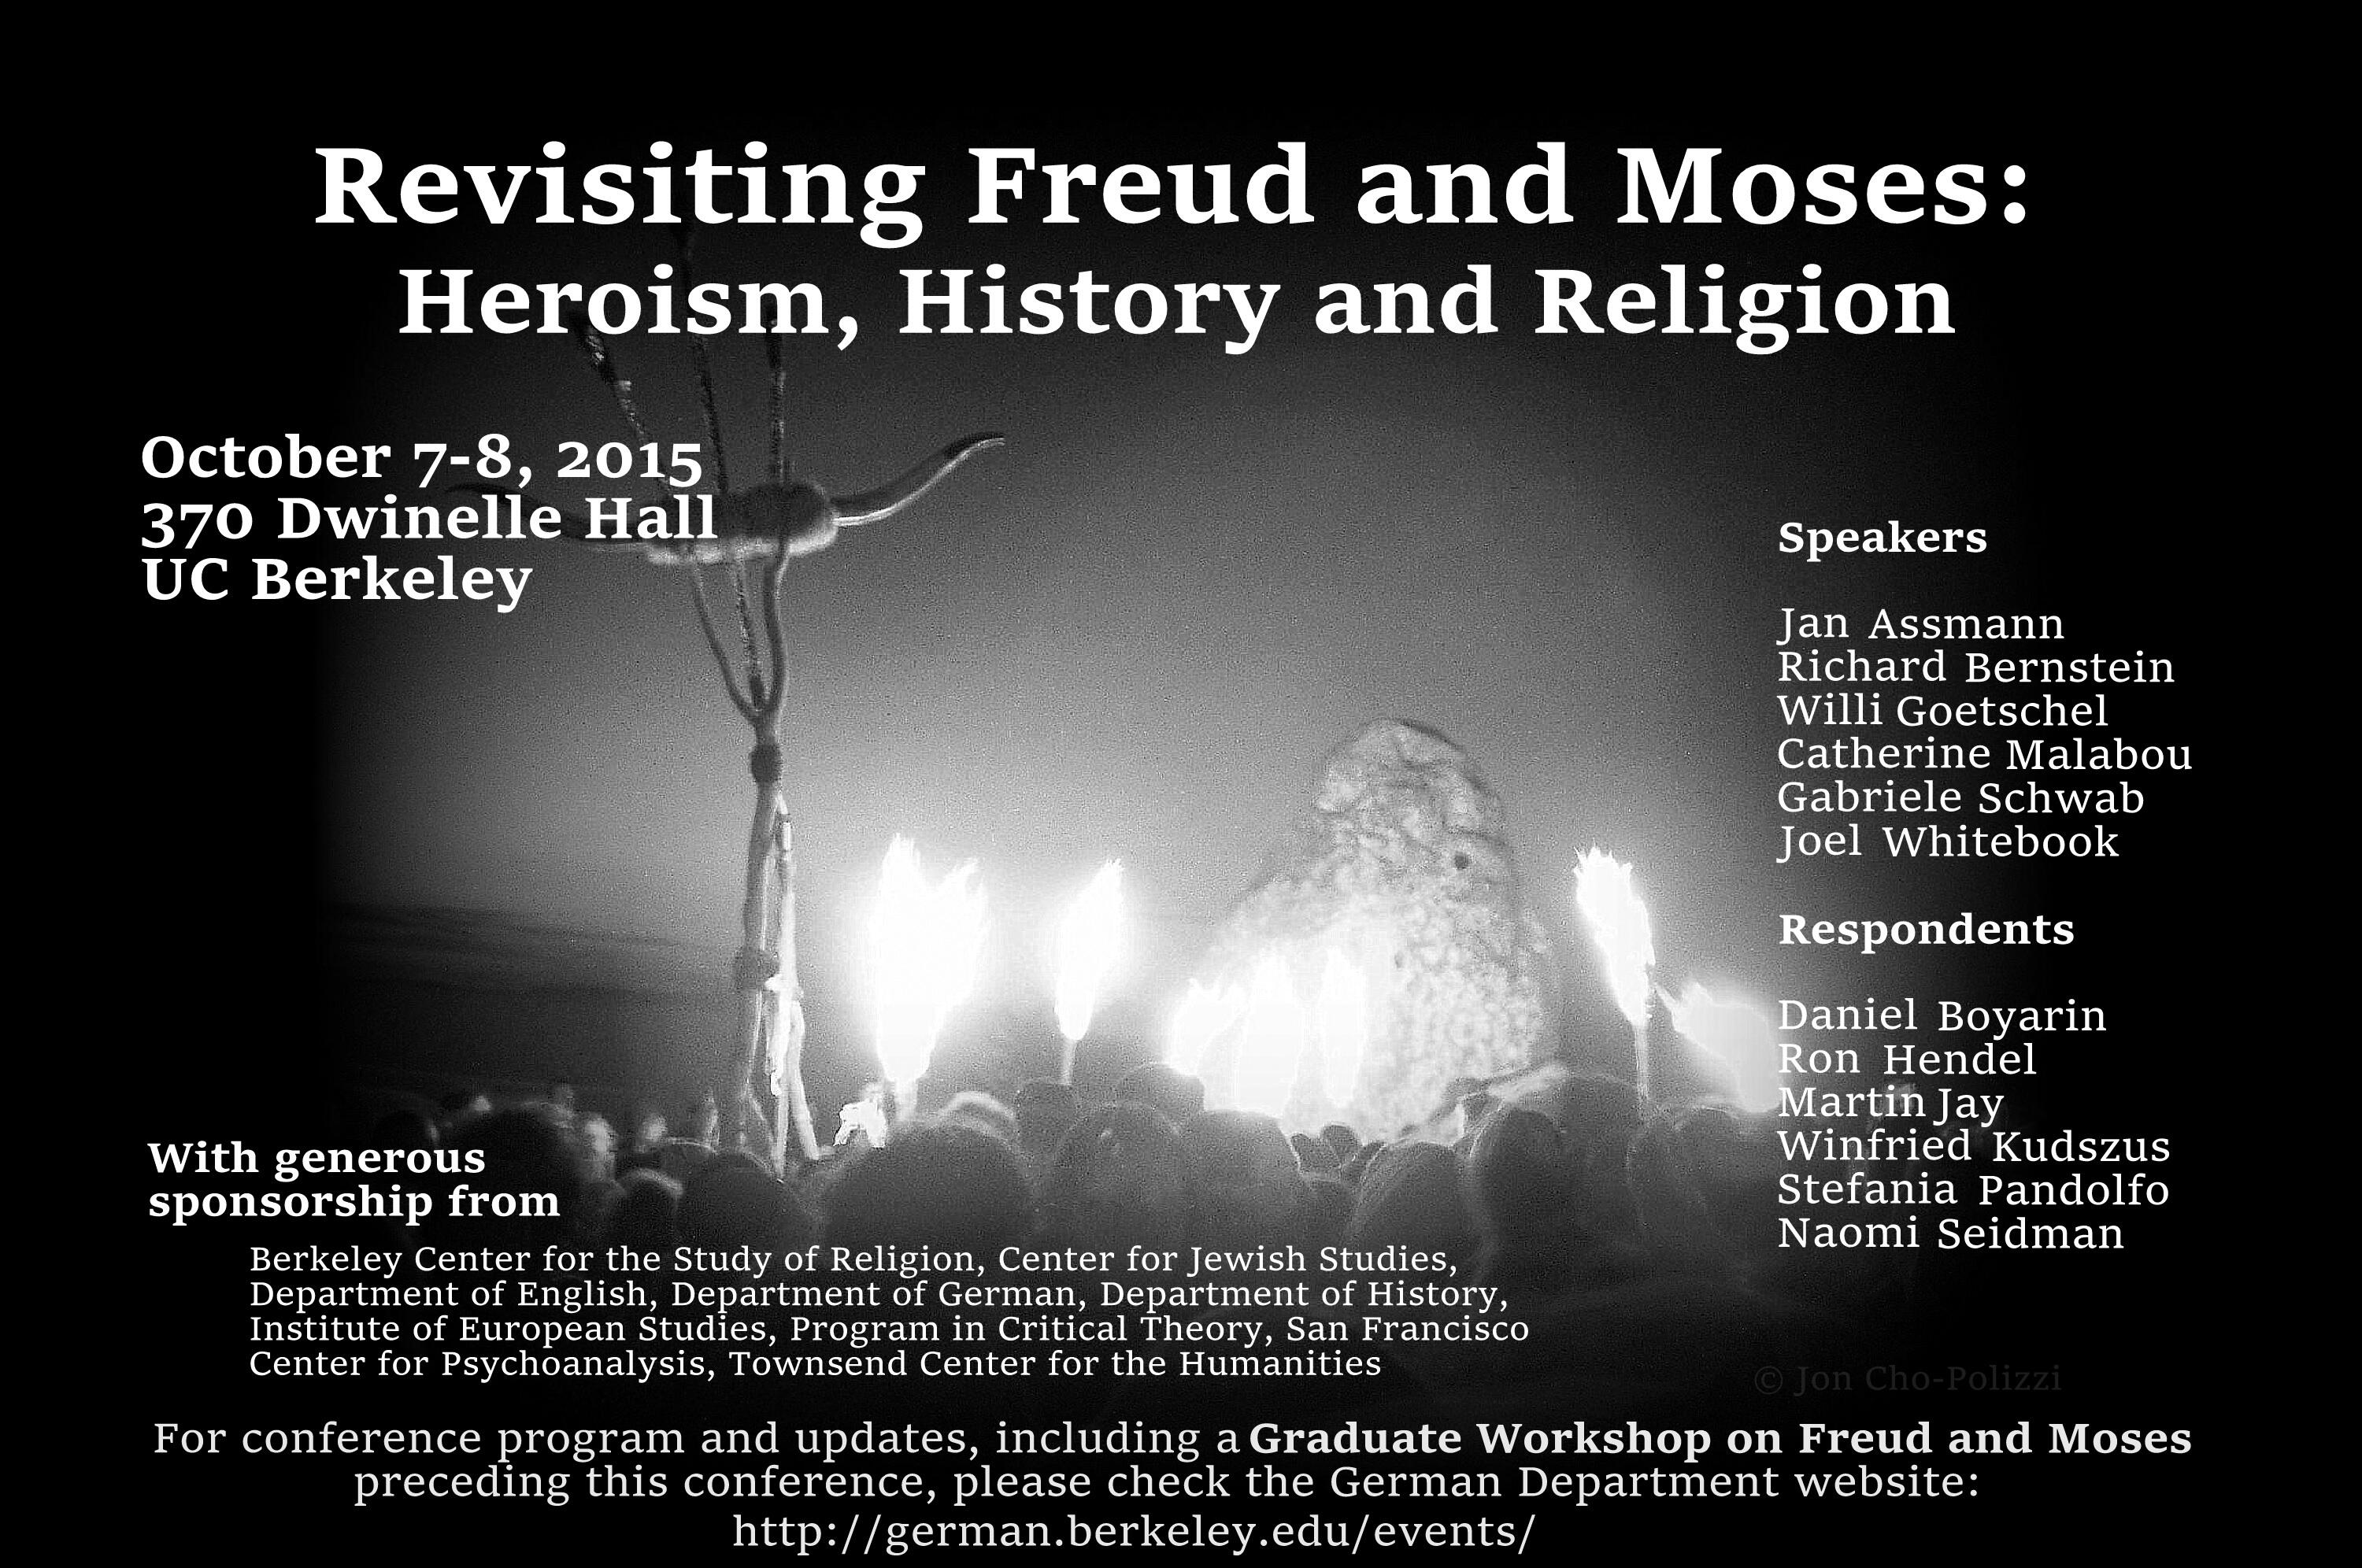  Heroism, History, & Religion Conference